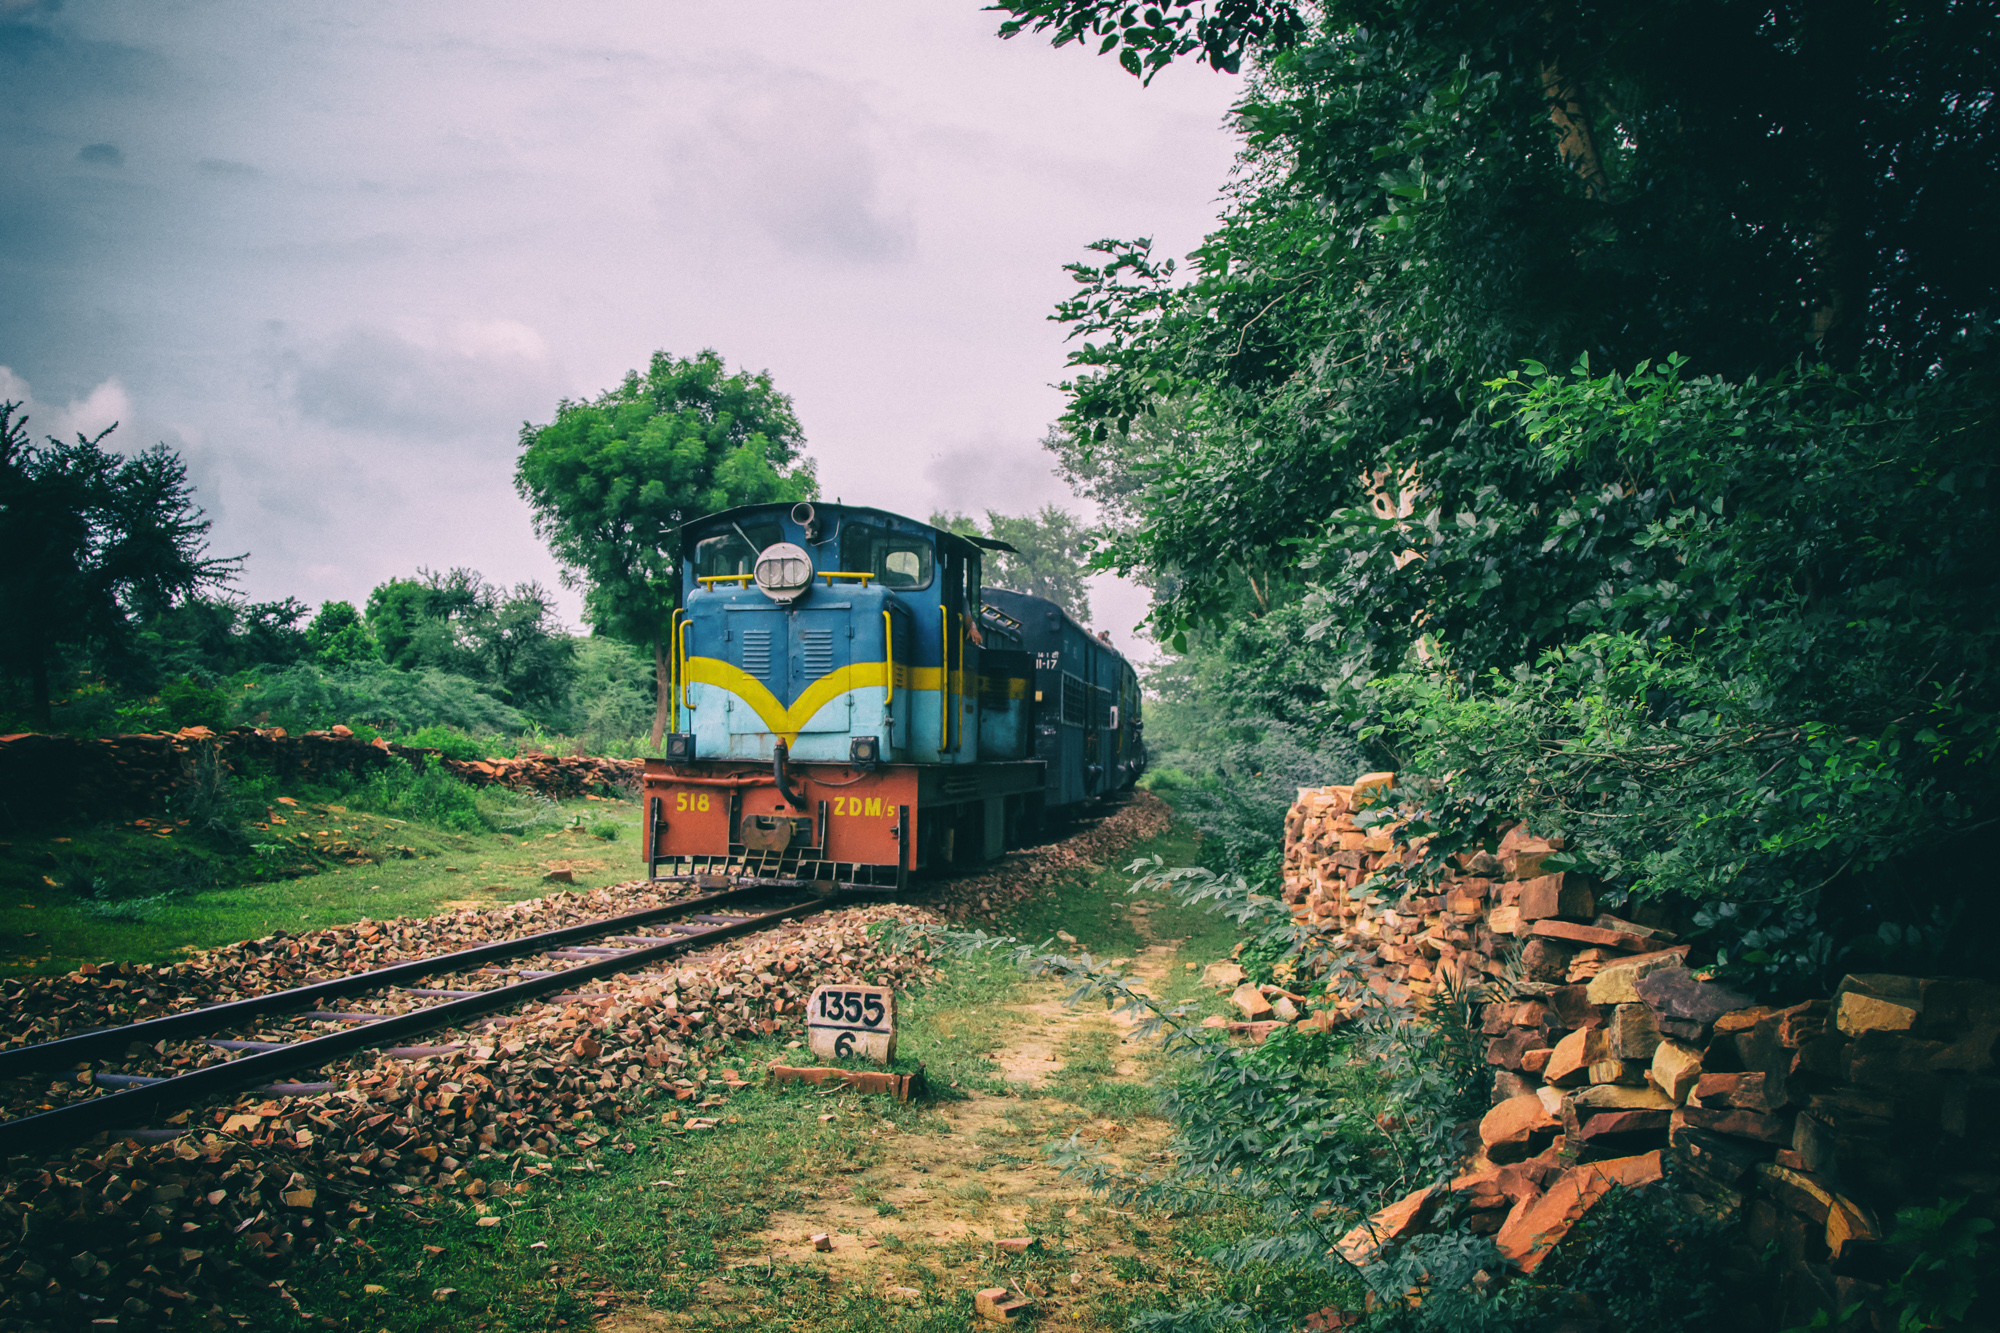 The Dhoulpur State Railway